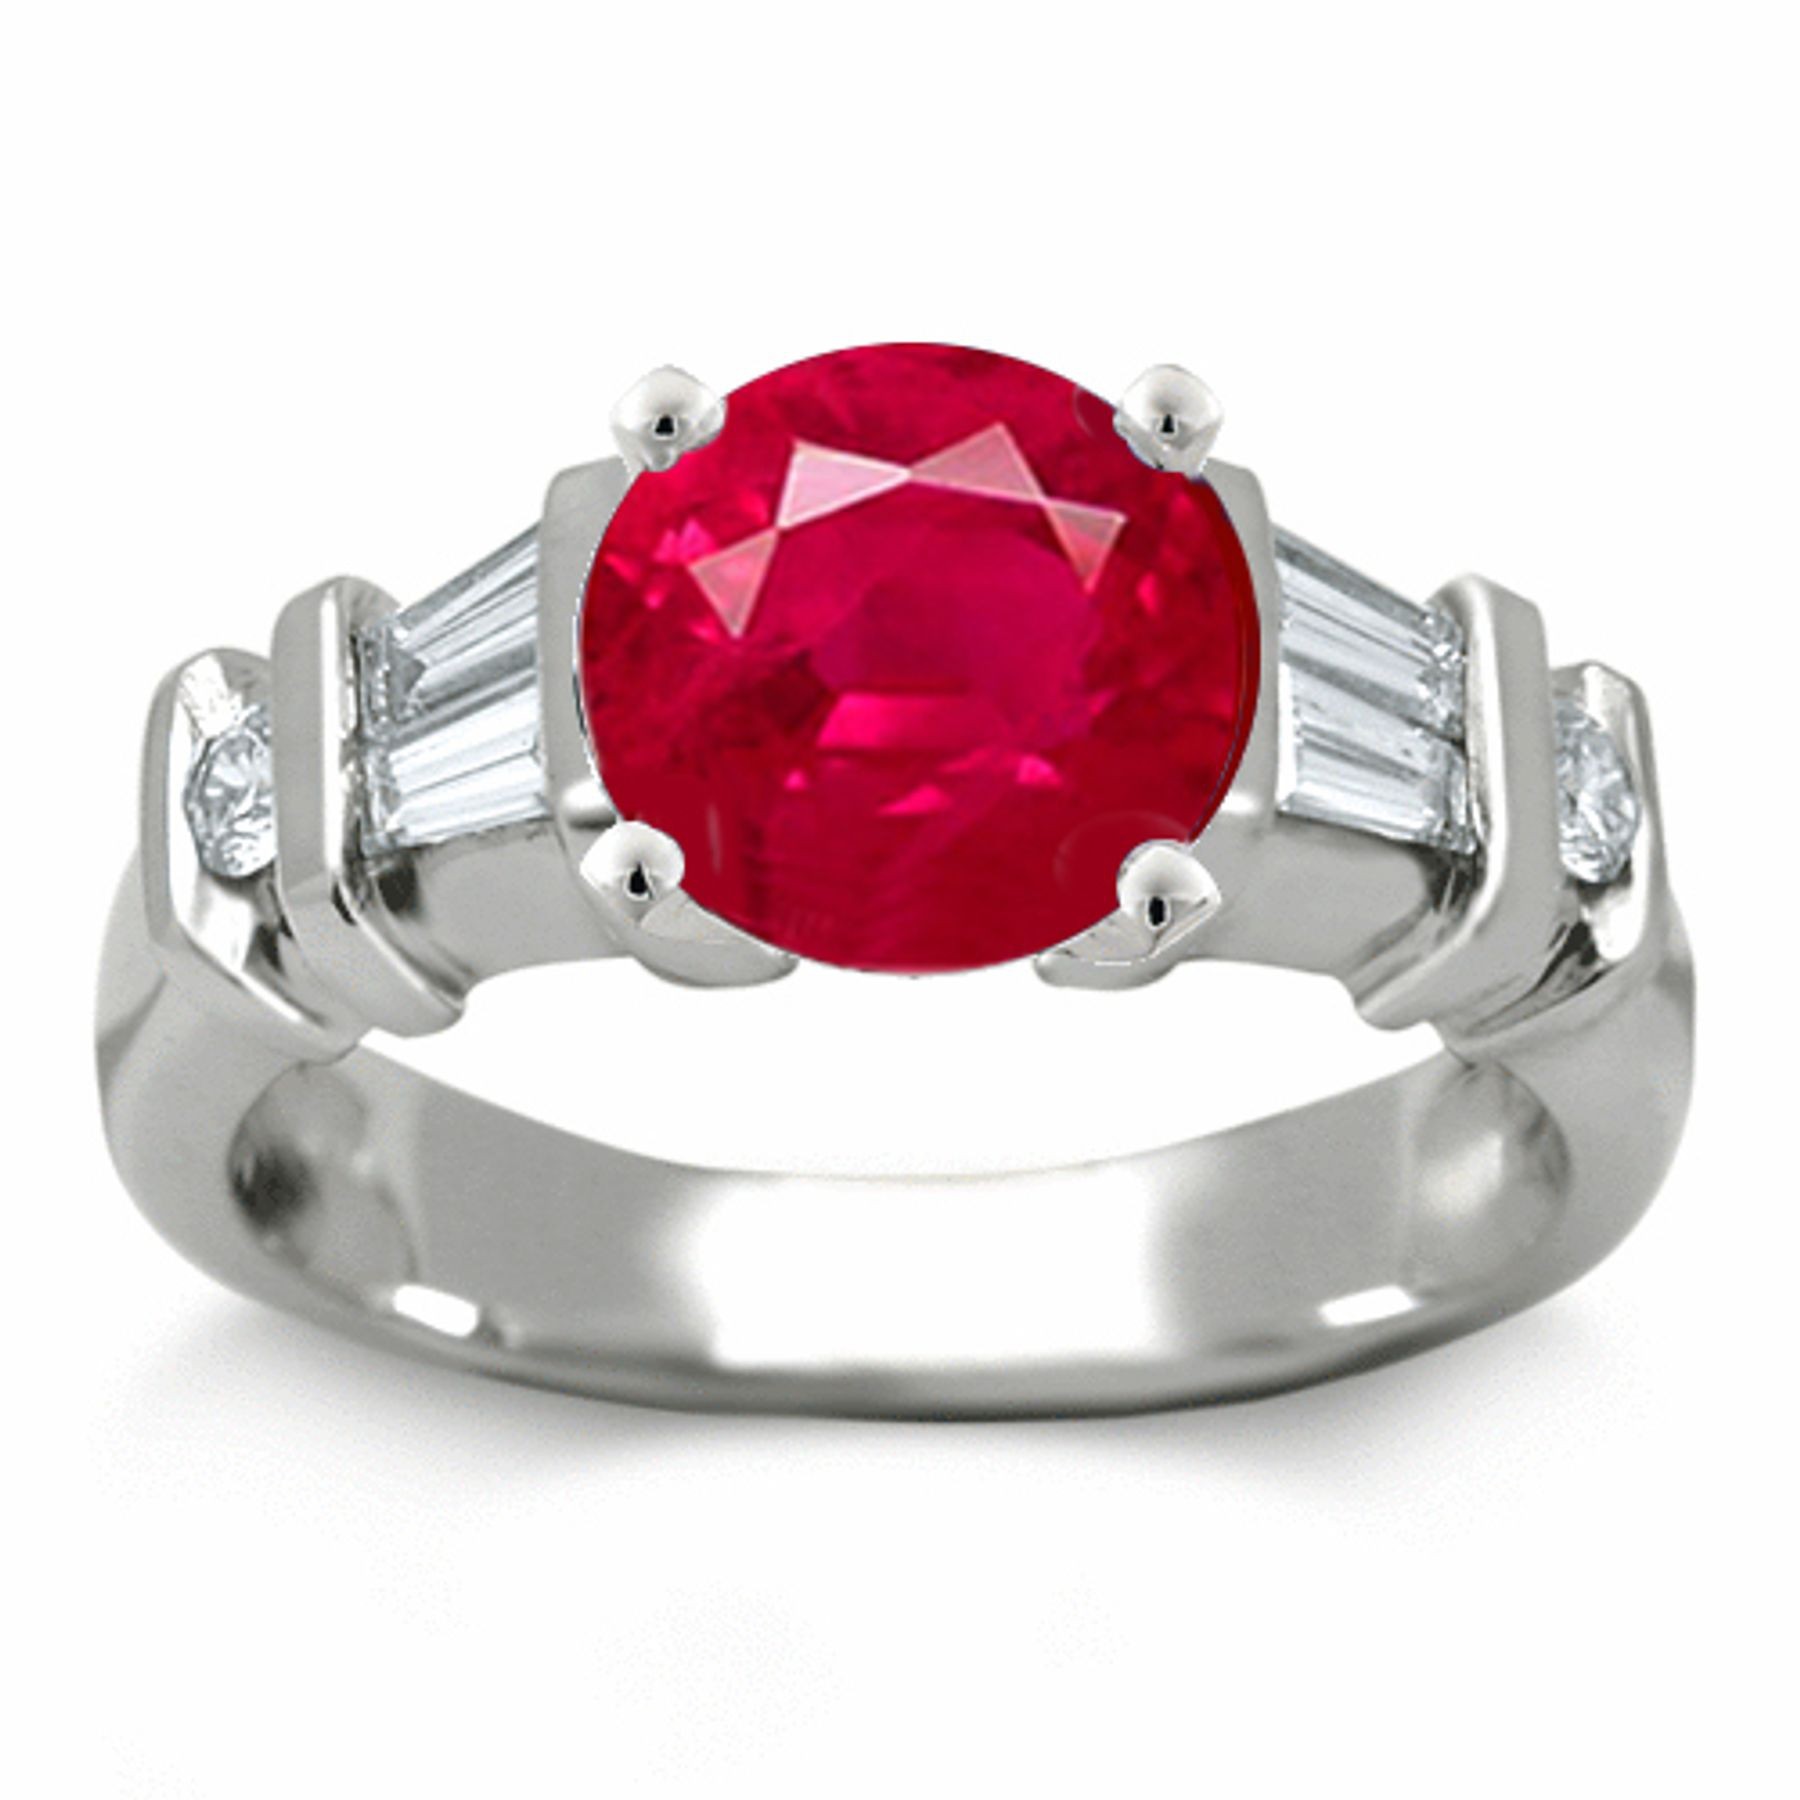 Ruby Anniversary Rings: Ruby Octagon and Diamond Trillions Ring in Platinum